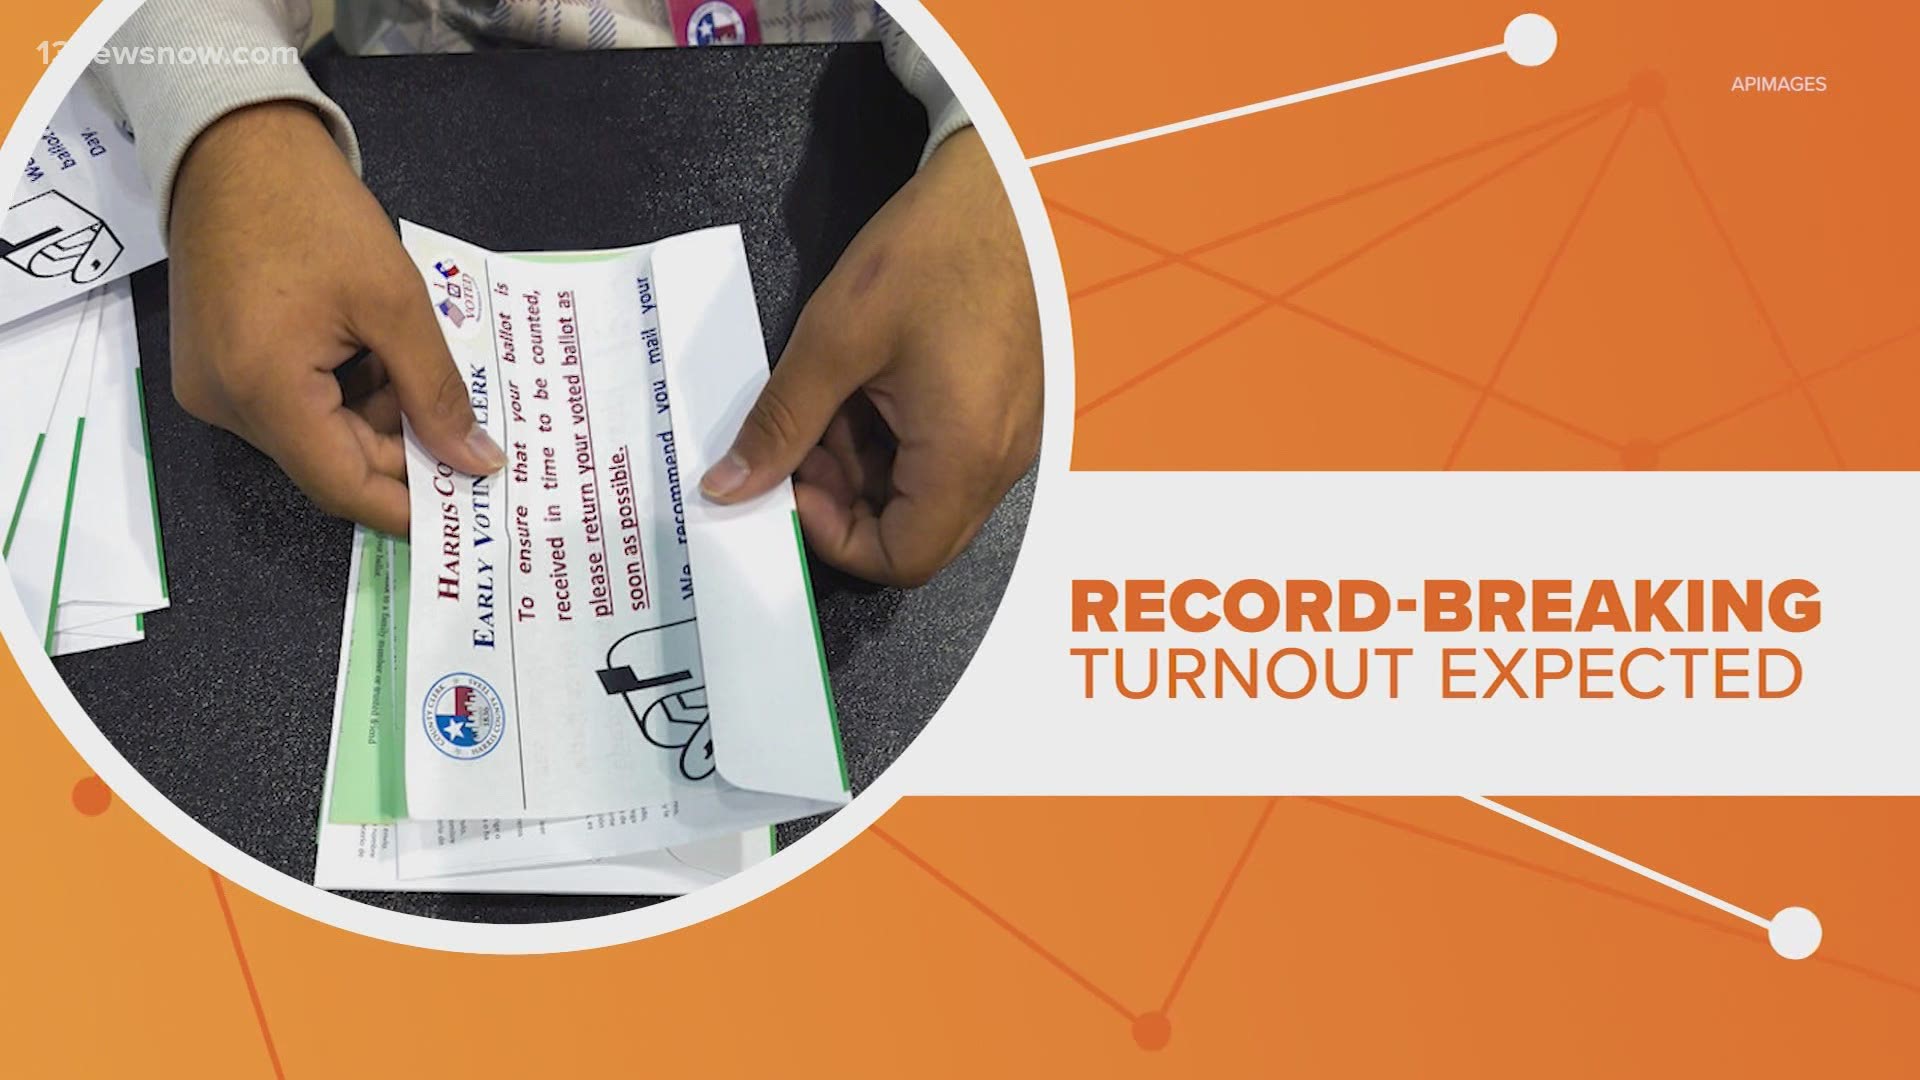 Connect the Dots: Record-breaking voter turnout this election